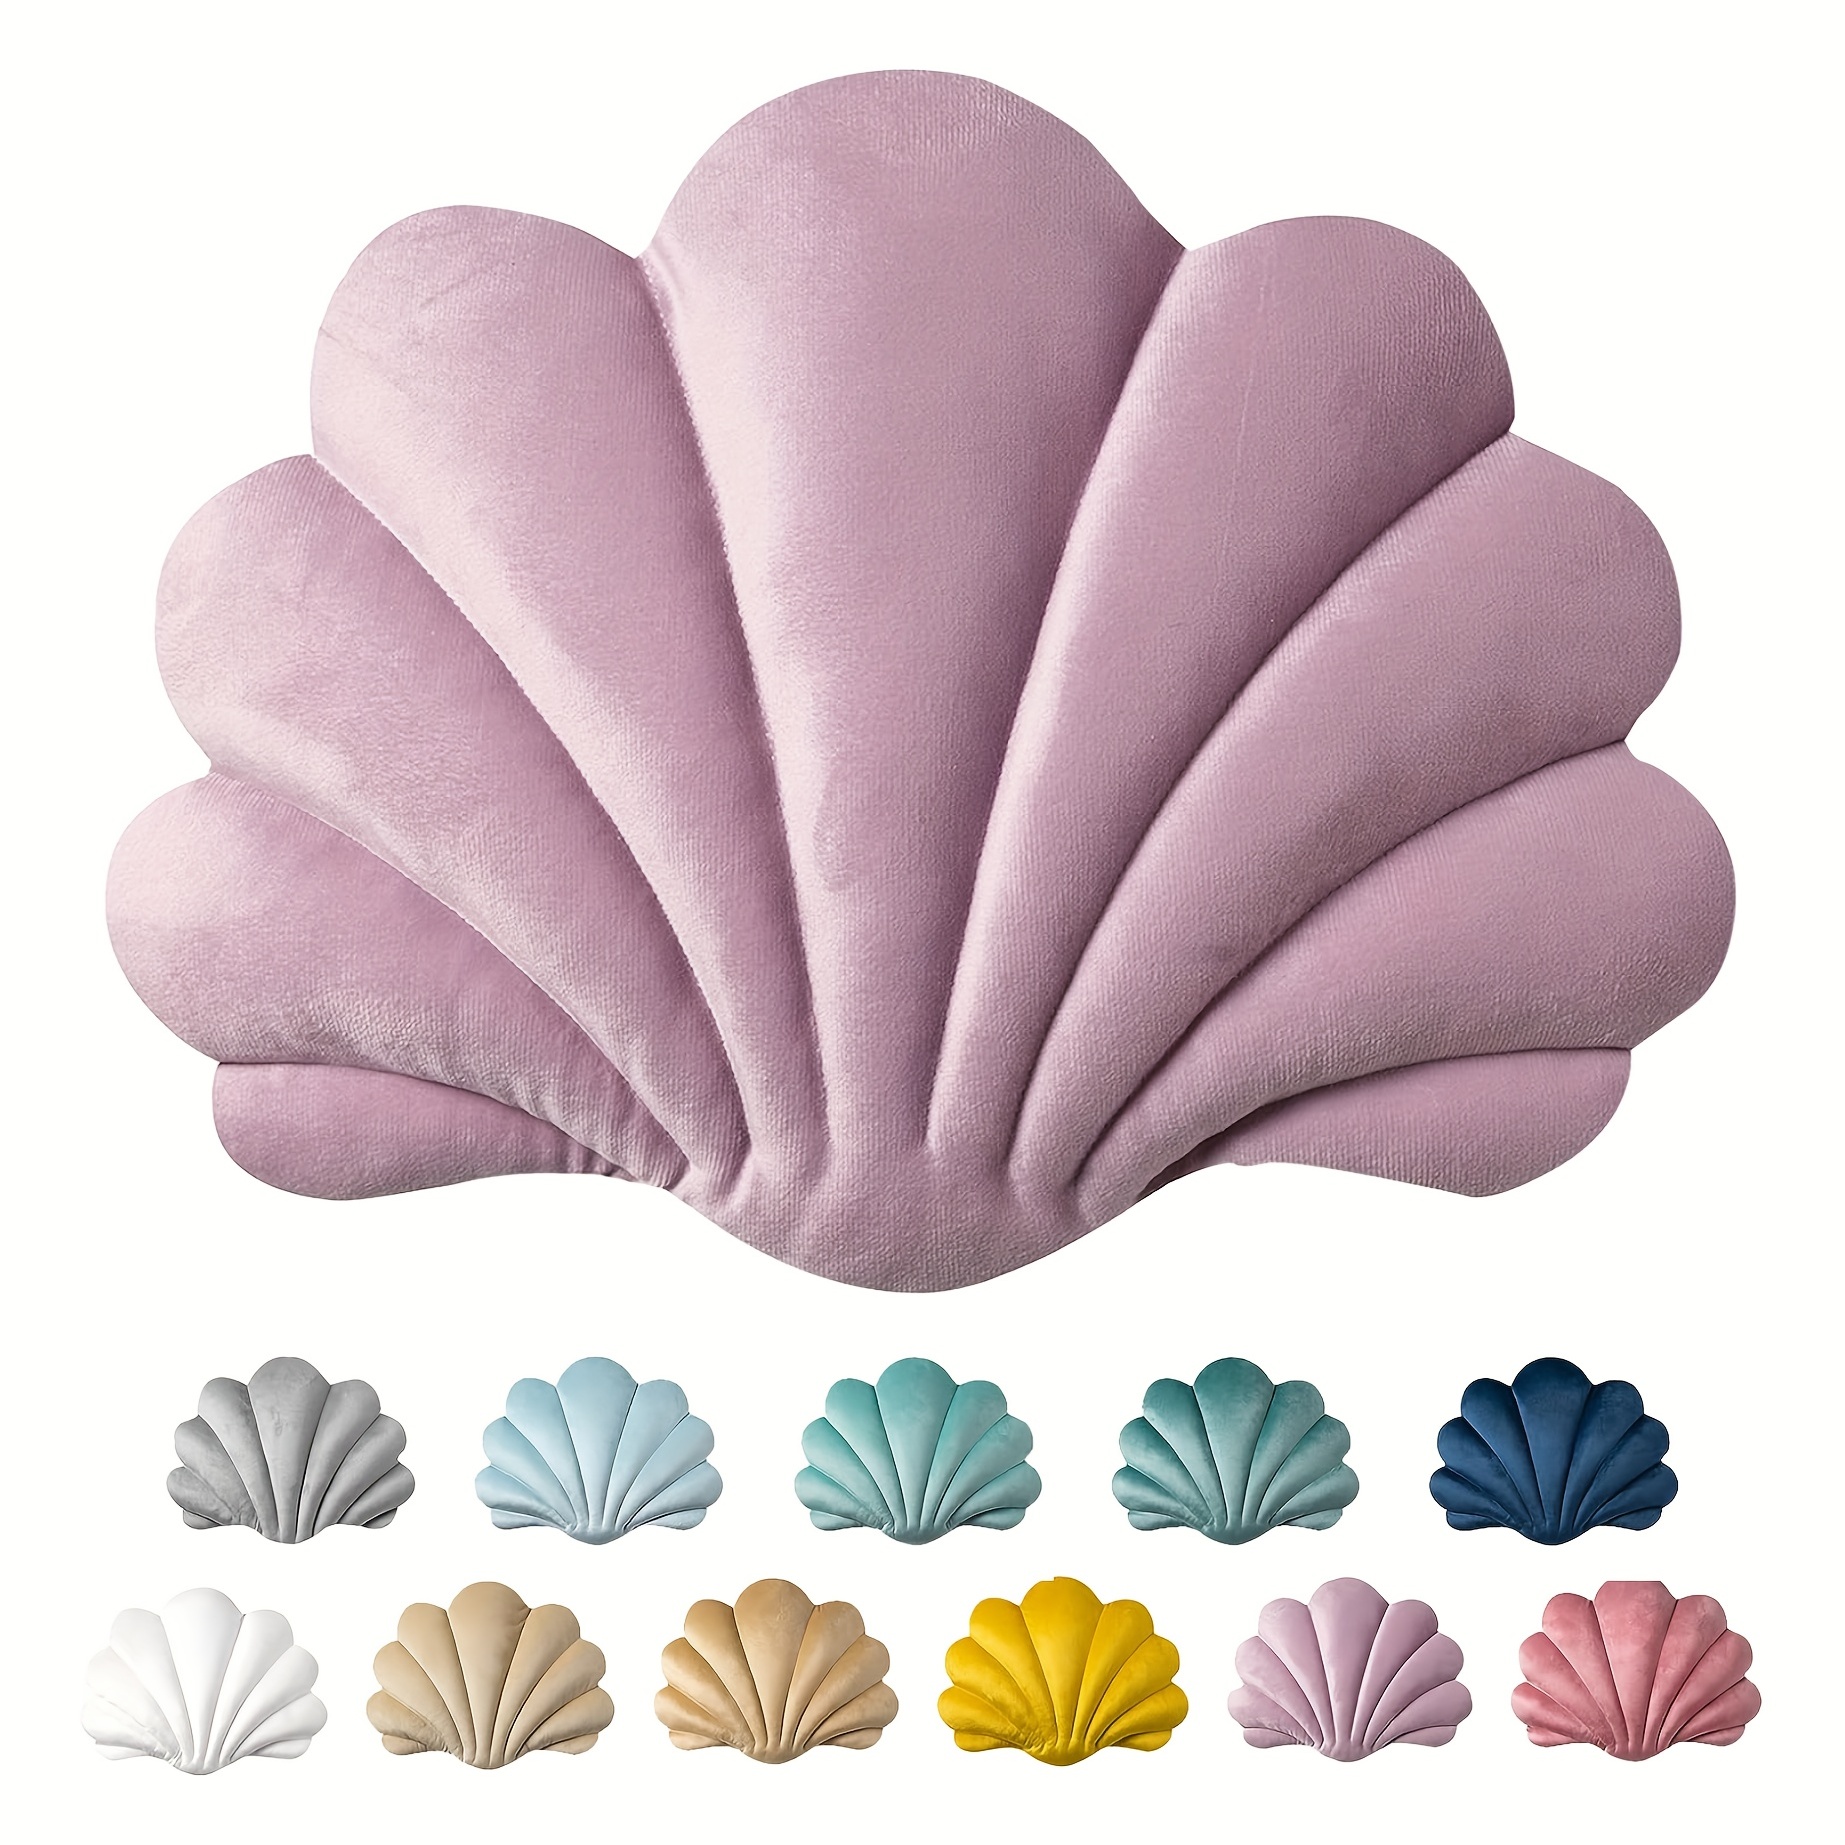 2 Pcs Soft Shell Pillow Seashell Shaped Accent Throw Pillows Seashell Pillow  Cute Decorative Pillow Cushion for Couch Bed Sofa Living Room Bedroom Room  Patio Decor, White, Light Blue 